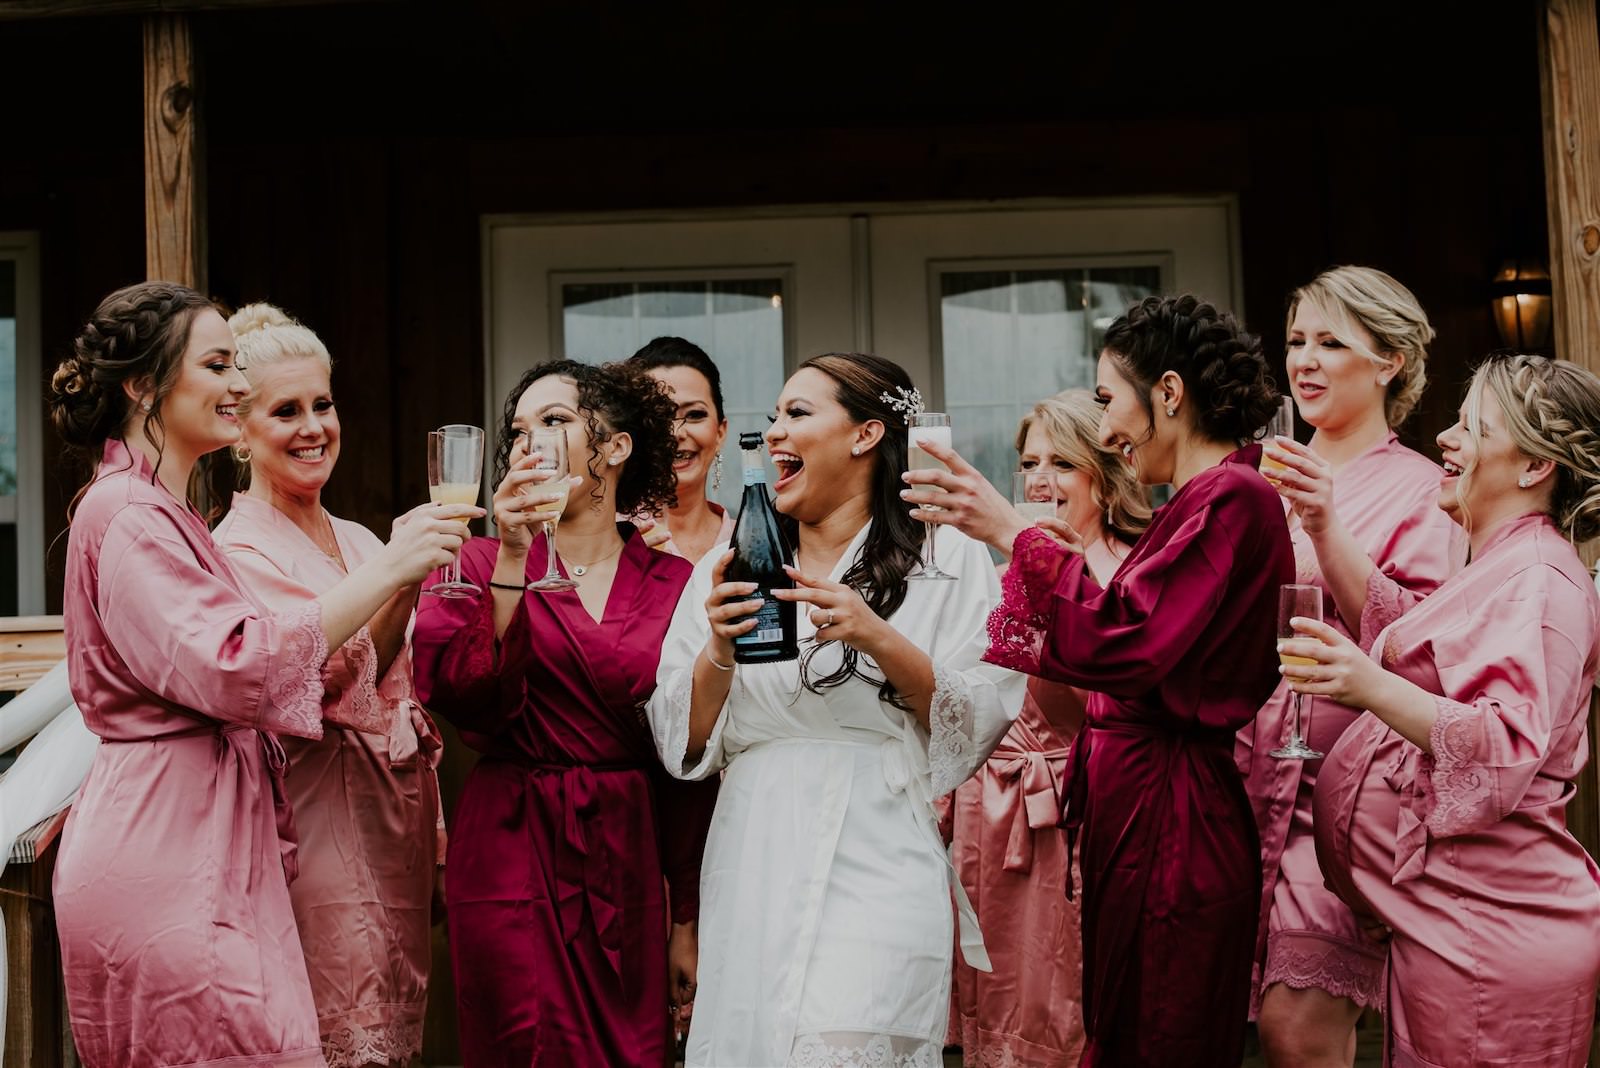 Bride and Bridesmaids Getting Ready in Pink and Burgundy Robes Popping Drinking Champagne | Femme Akoi Beauty Studio Wedding Hair and Makeup